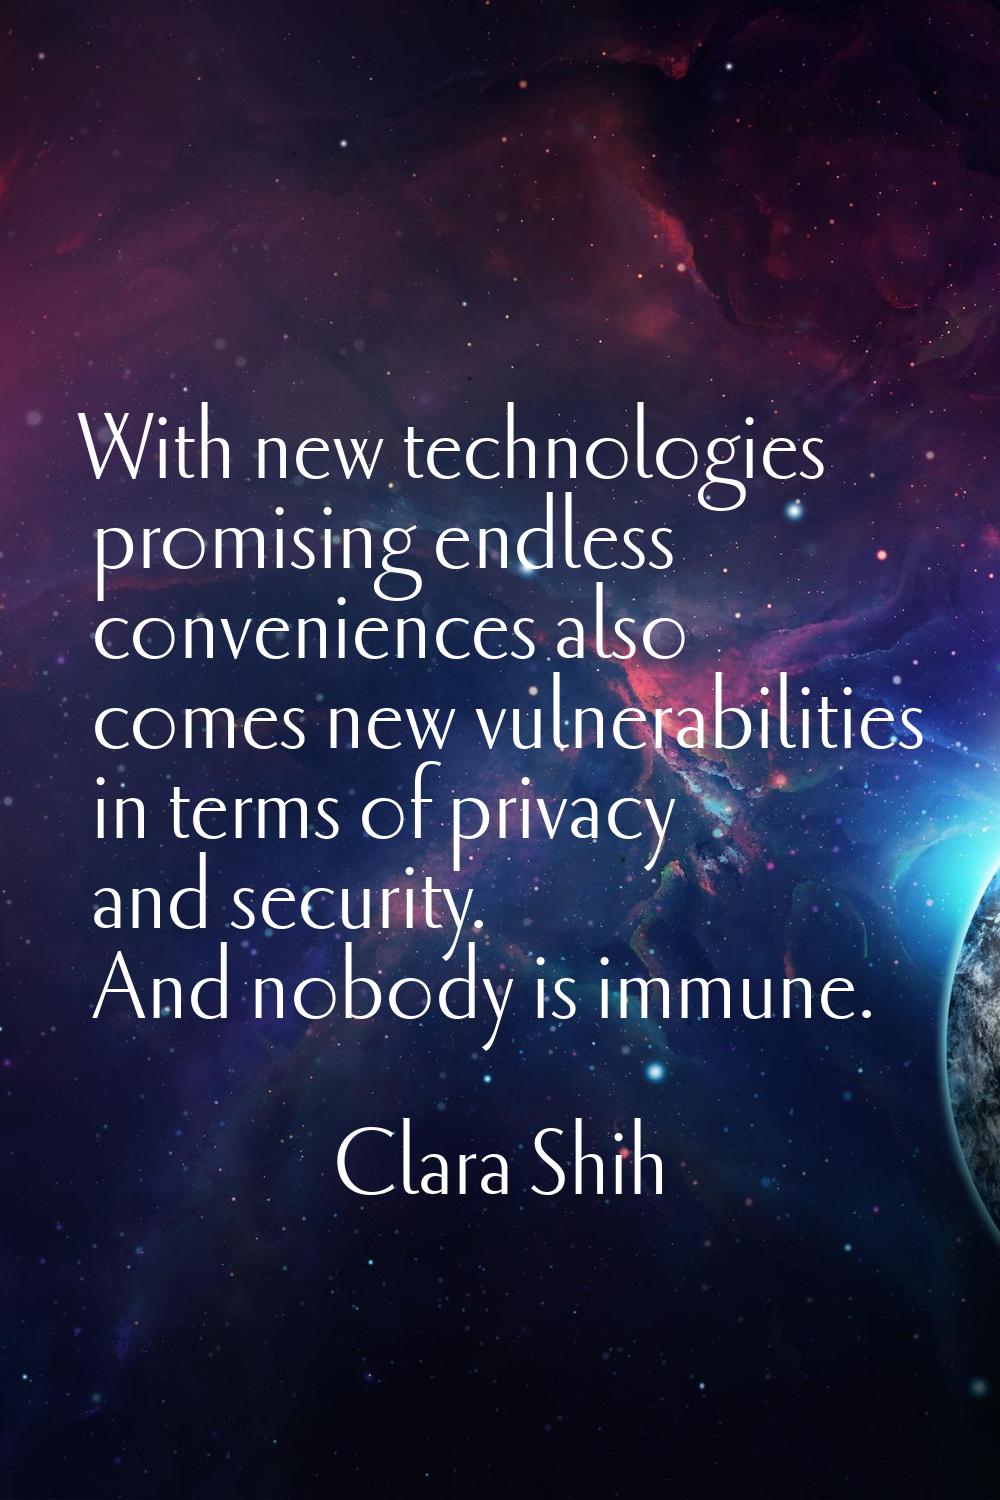 With new technologies promising endless conveniences also comes new vulnerabilities in terms of pri